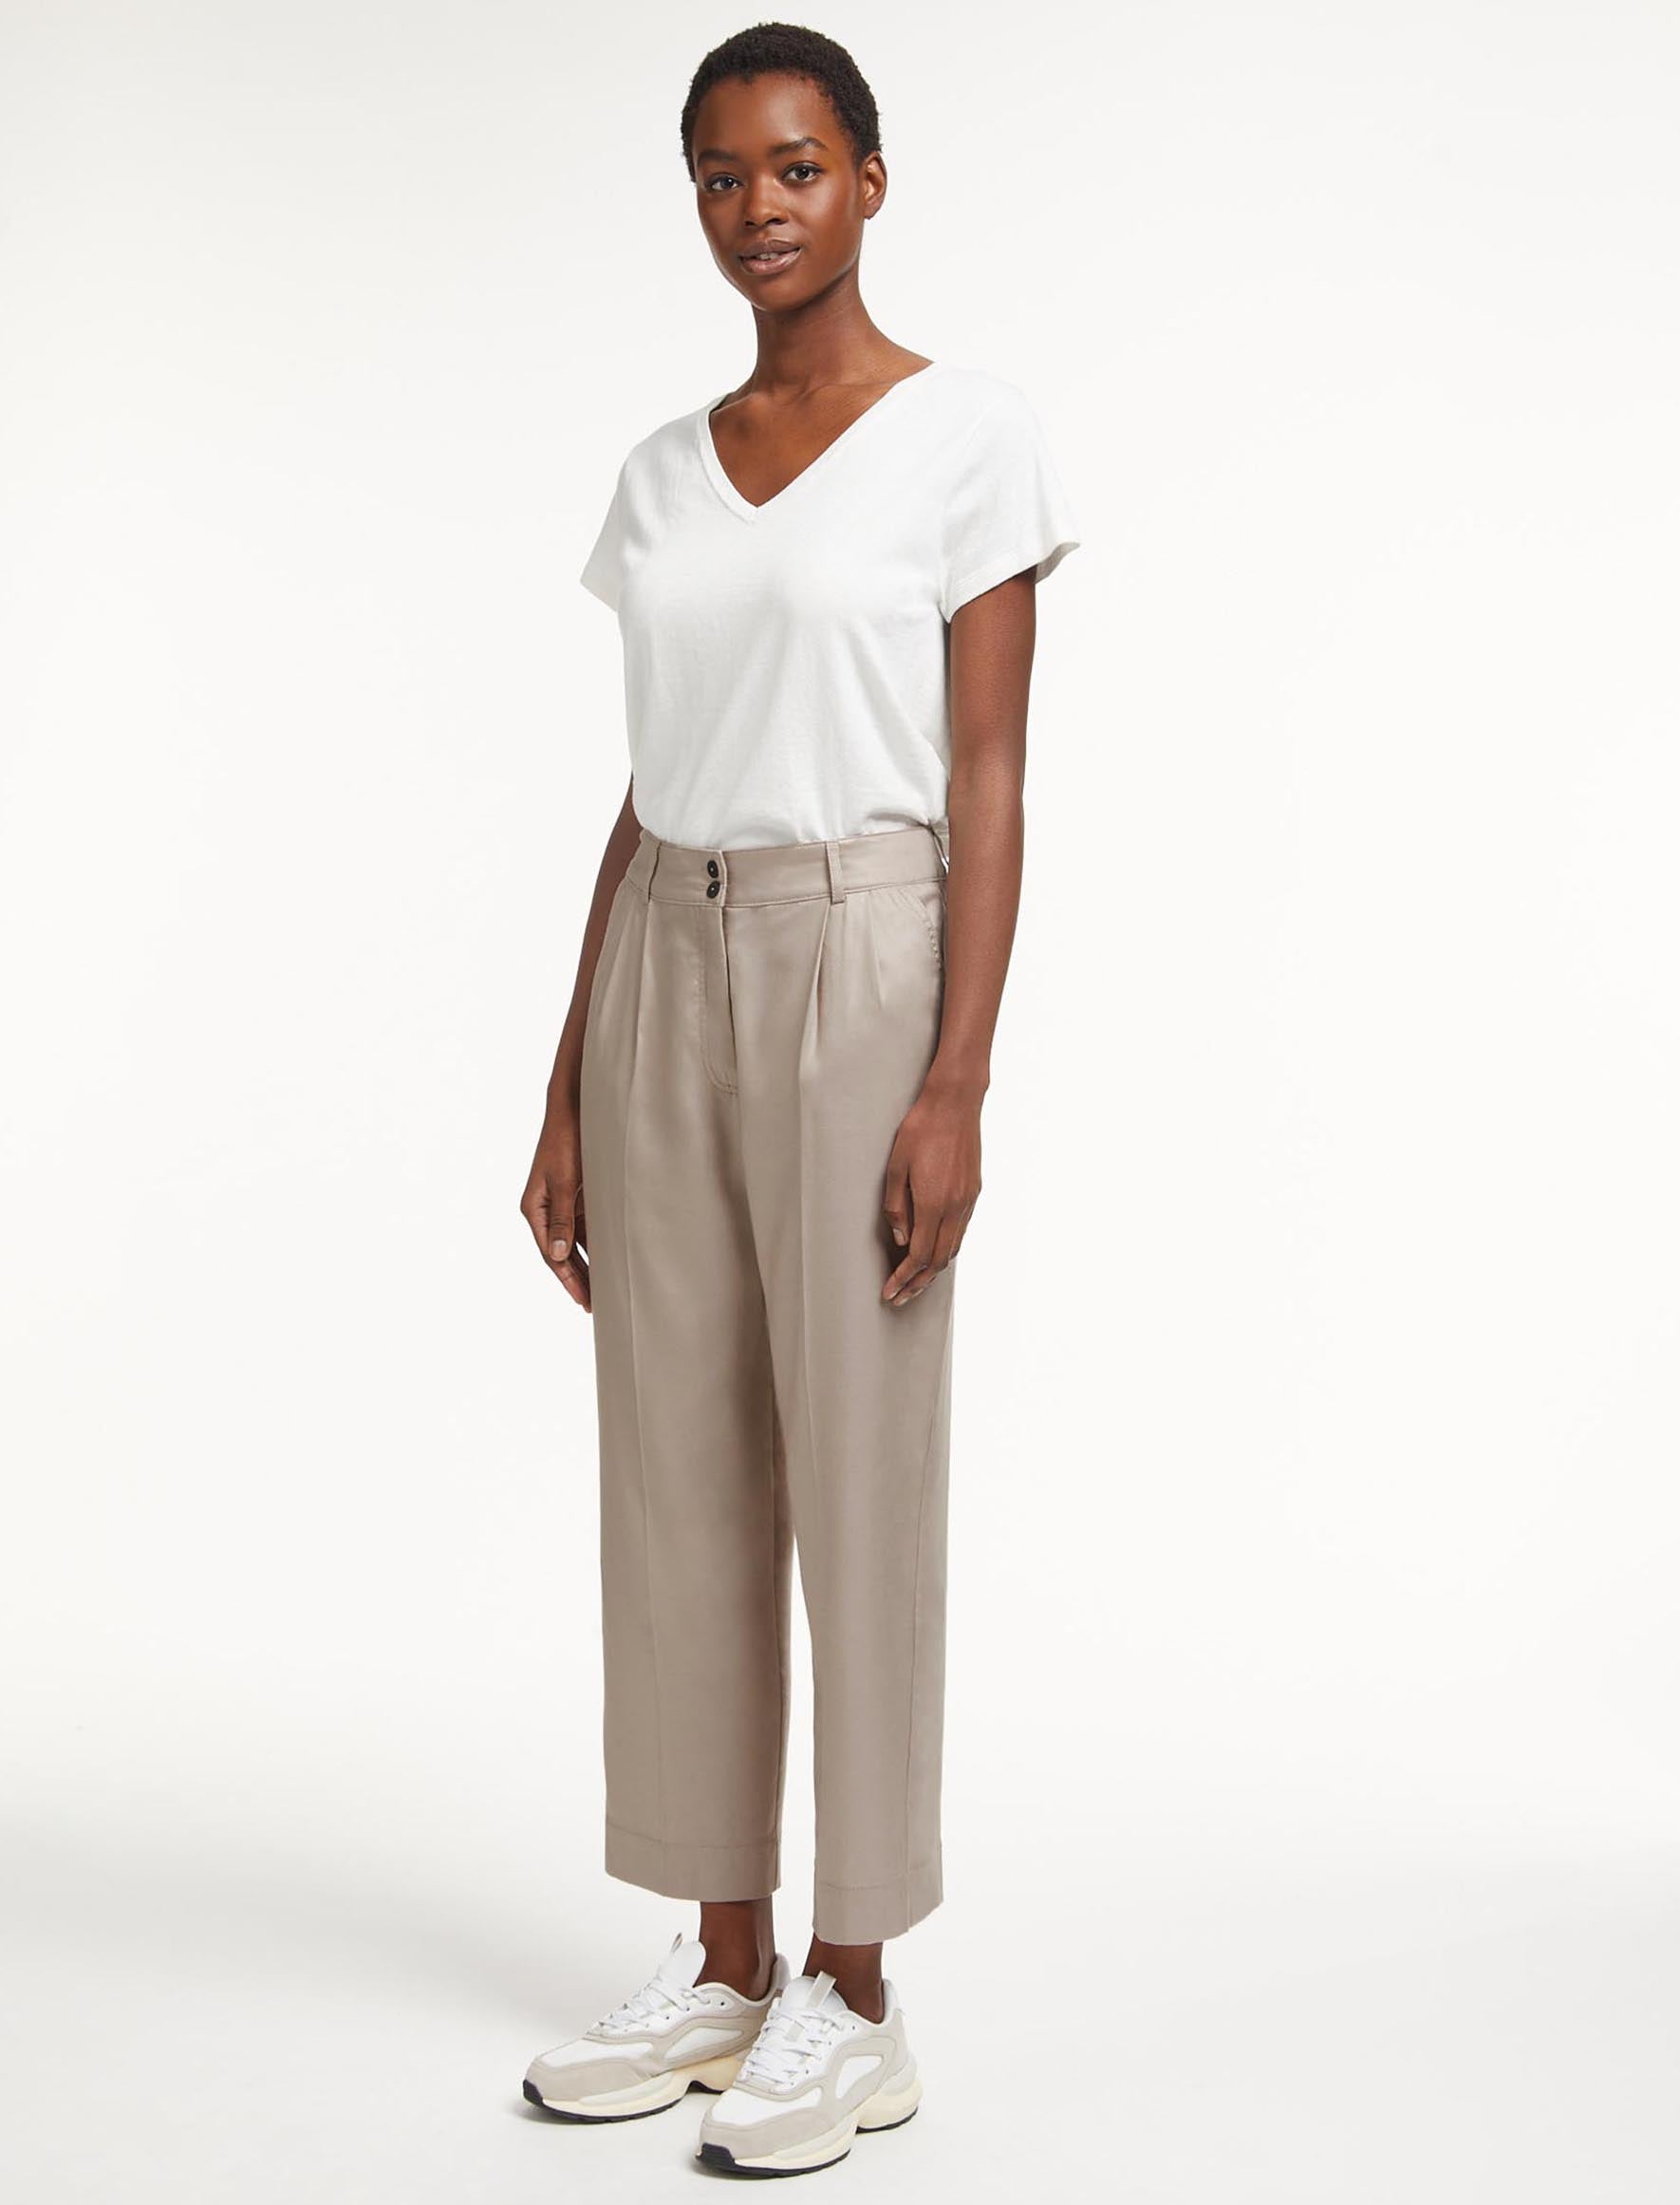 Milo Taupe Stretch Pull On Pant | Equestrian